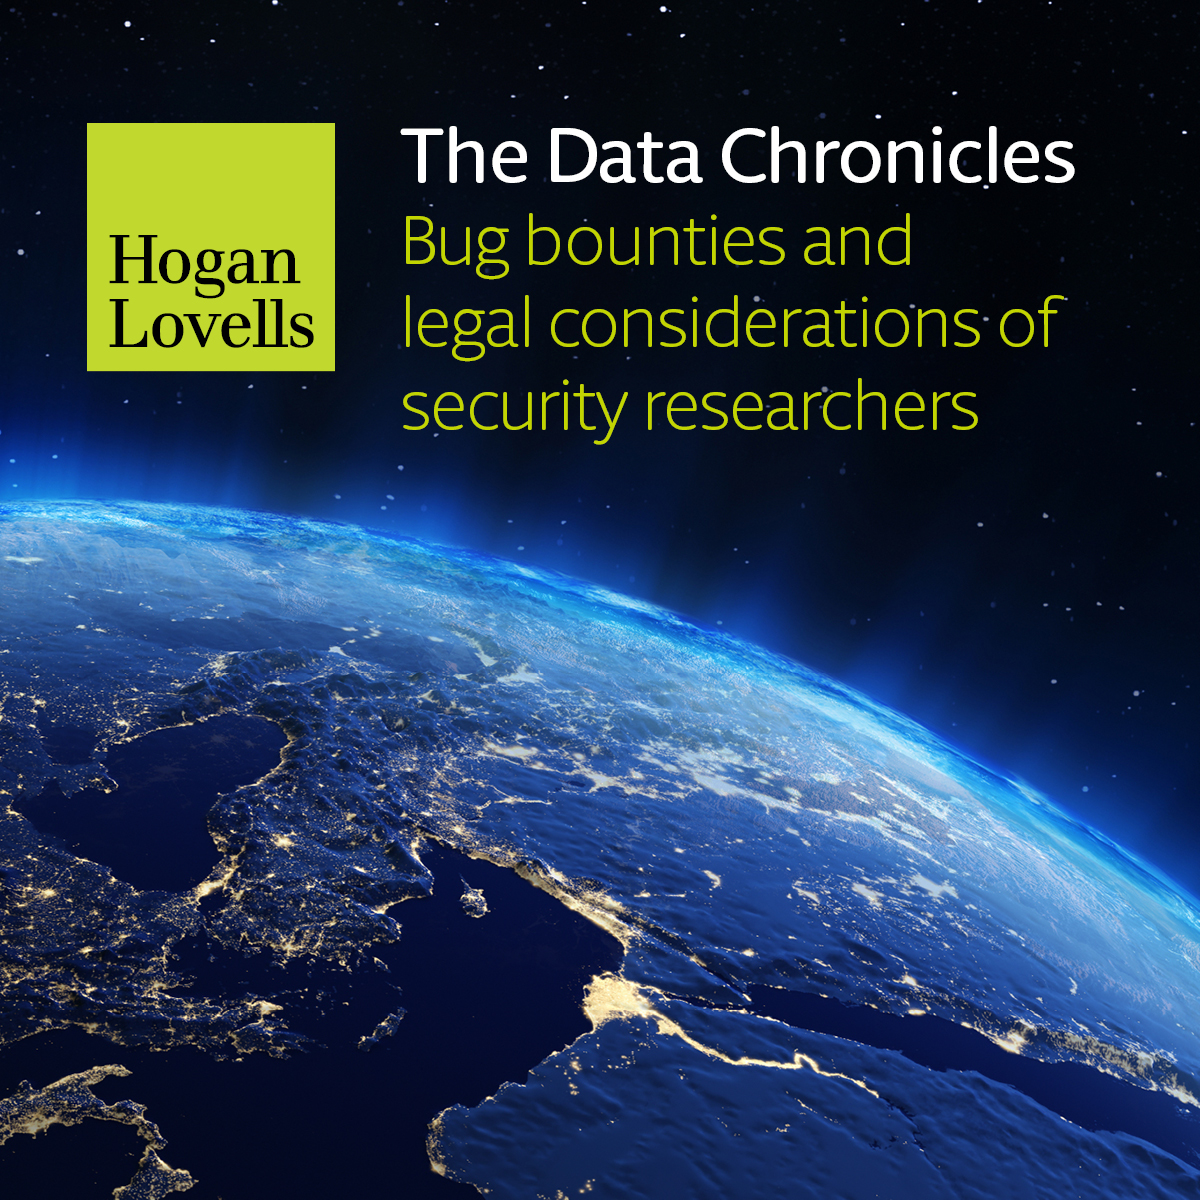 The Data Chronicles_Bug bounties and legal considerations of security researchers